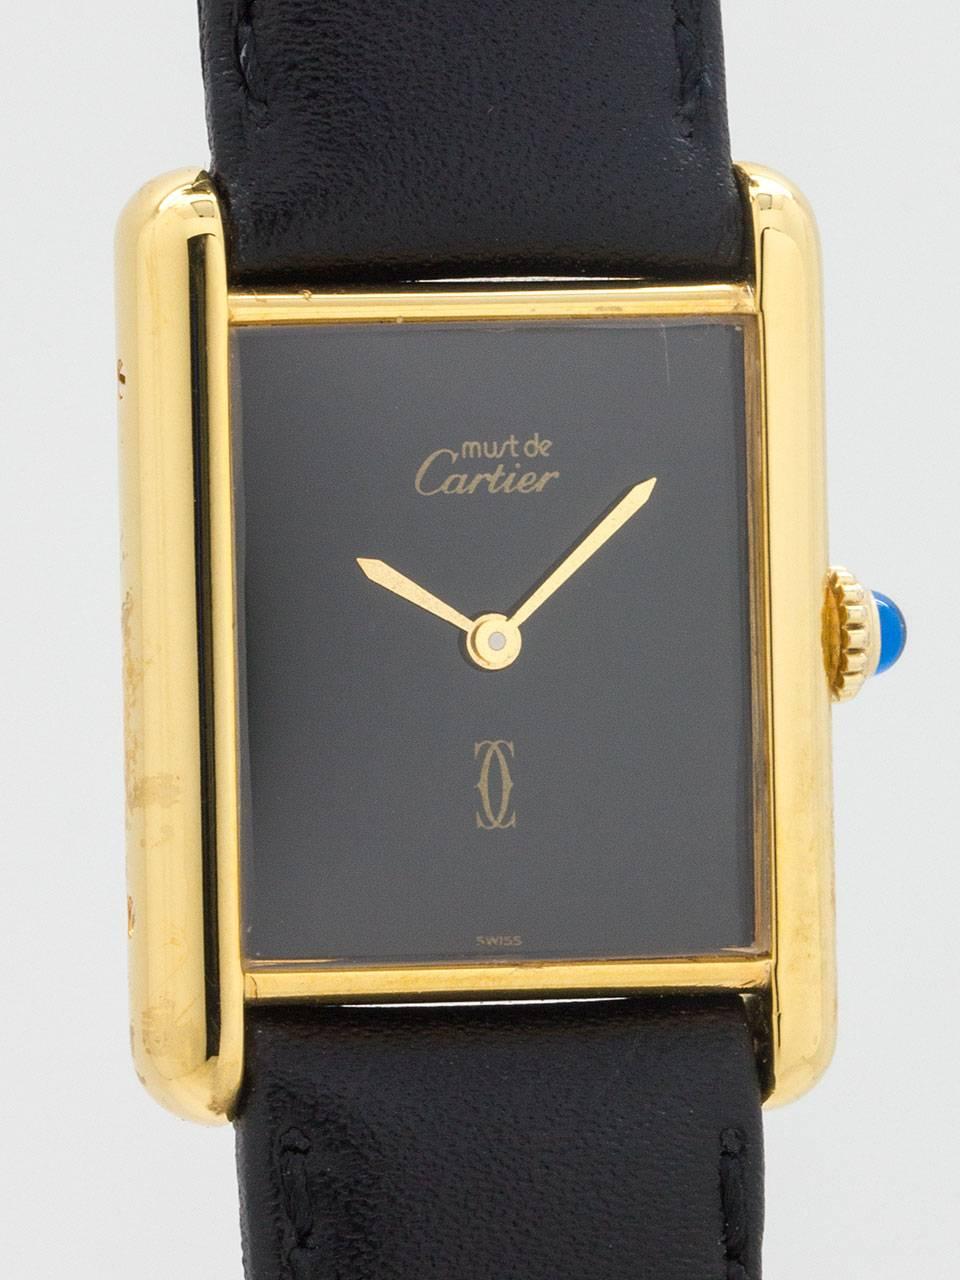 Cartier Man's Vermeil Tank Louis Must de Cartier, circa 1980s. Vermeil, 20 microns gold over silver, 23.5 X 31mm case secured by four screws. Classic black dial signed Must de Cartier and double C logo. Clean dial without indexes, only tapered gold